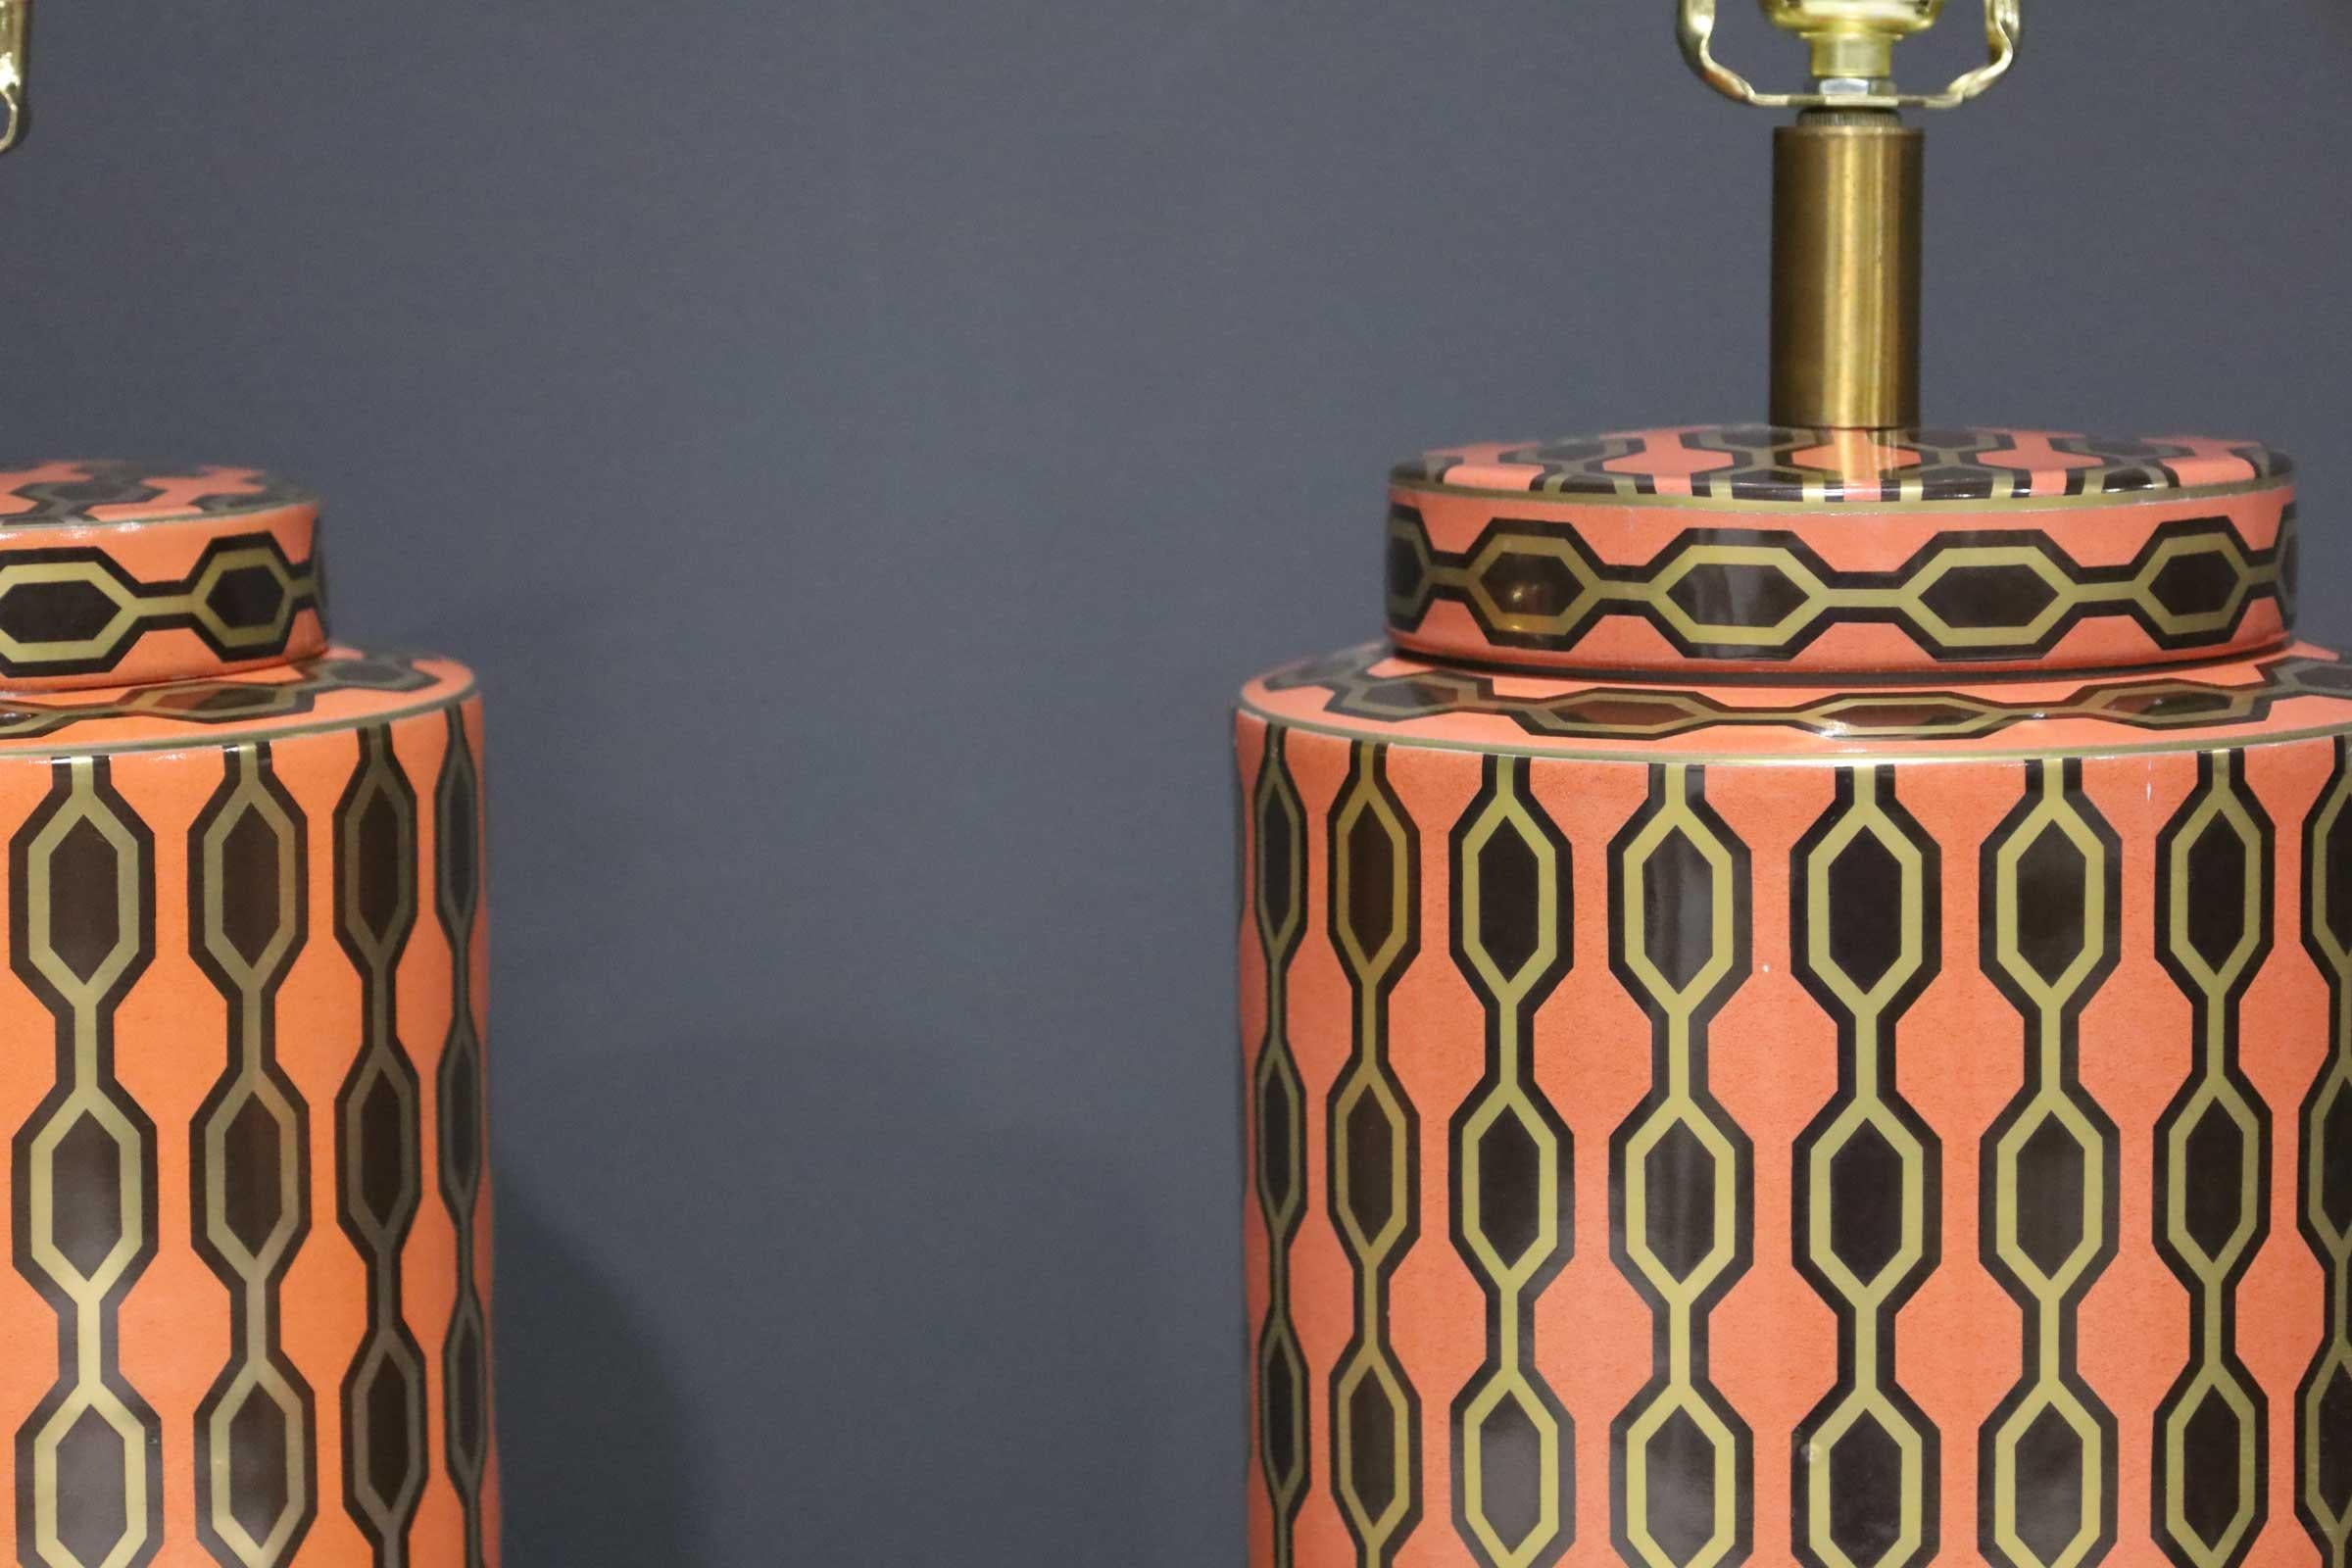 Vibrant geometric pattern in orange, gold and brown make these porcelain lamps stand out in any room. Add finials and a shade of your choice.